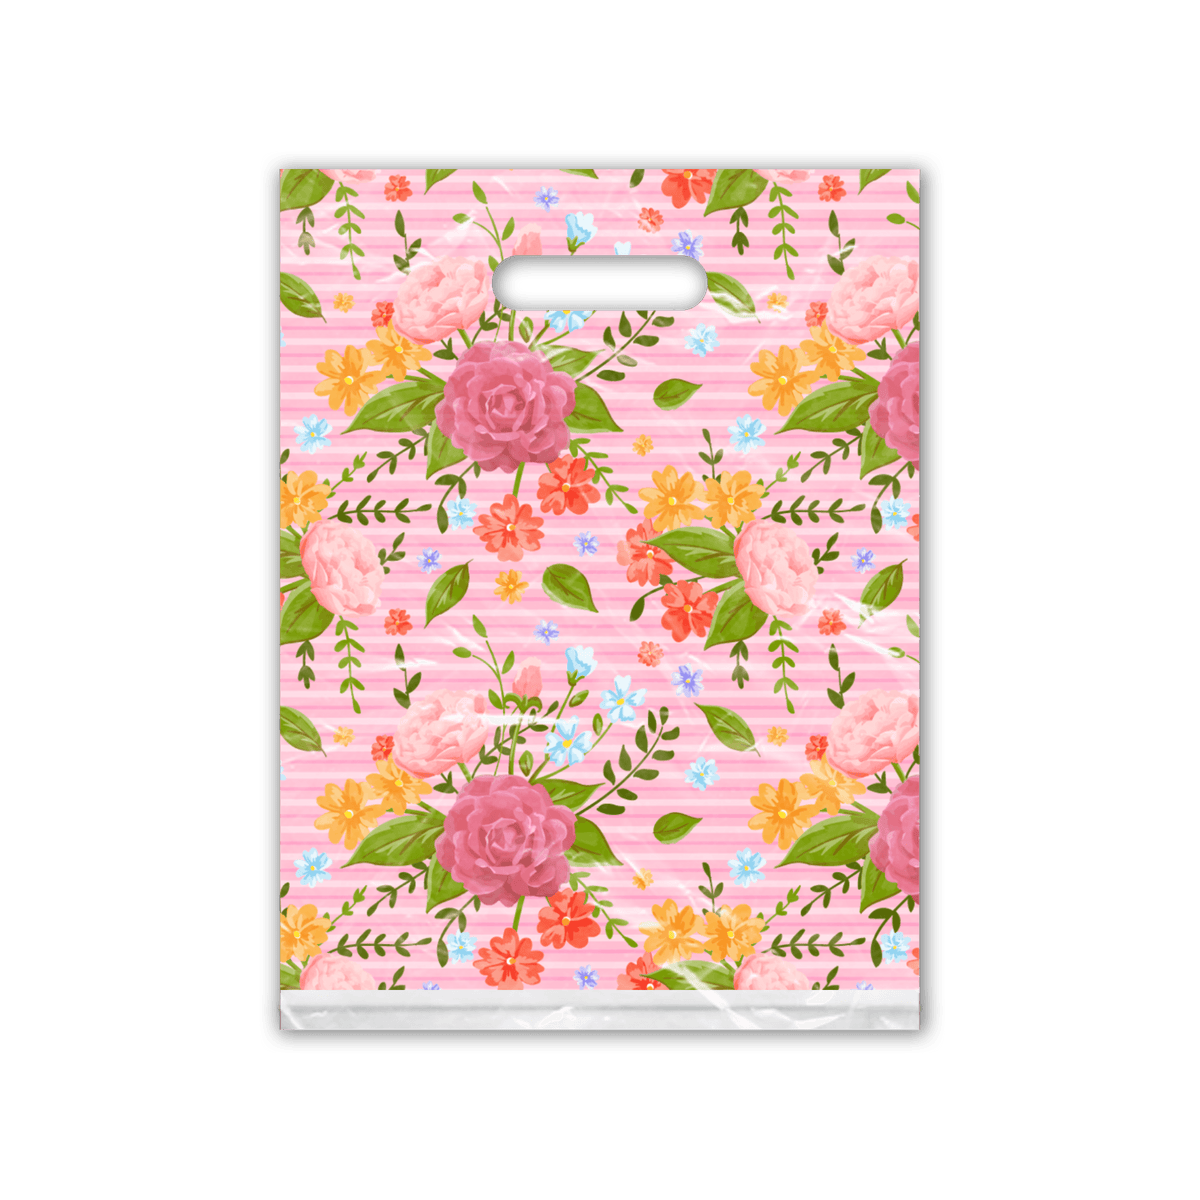 Floral Roses Designer Poly Mailers Shipping Envelopes Premium Printed Bags